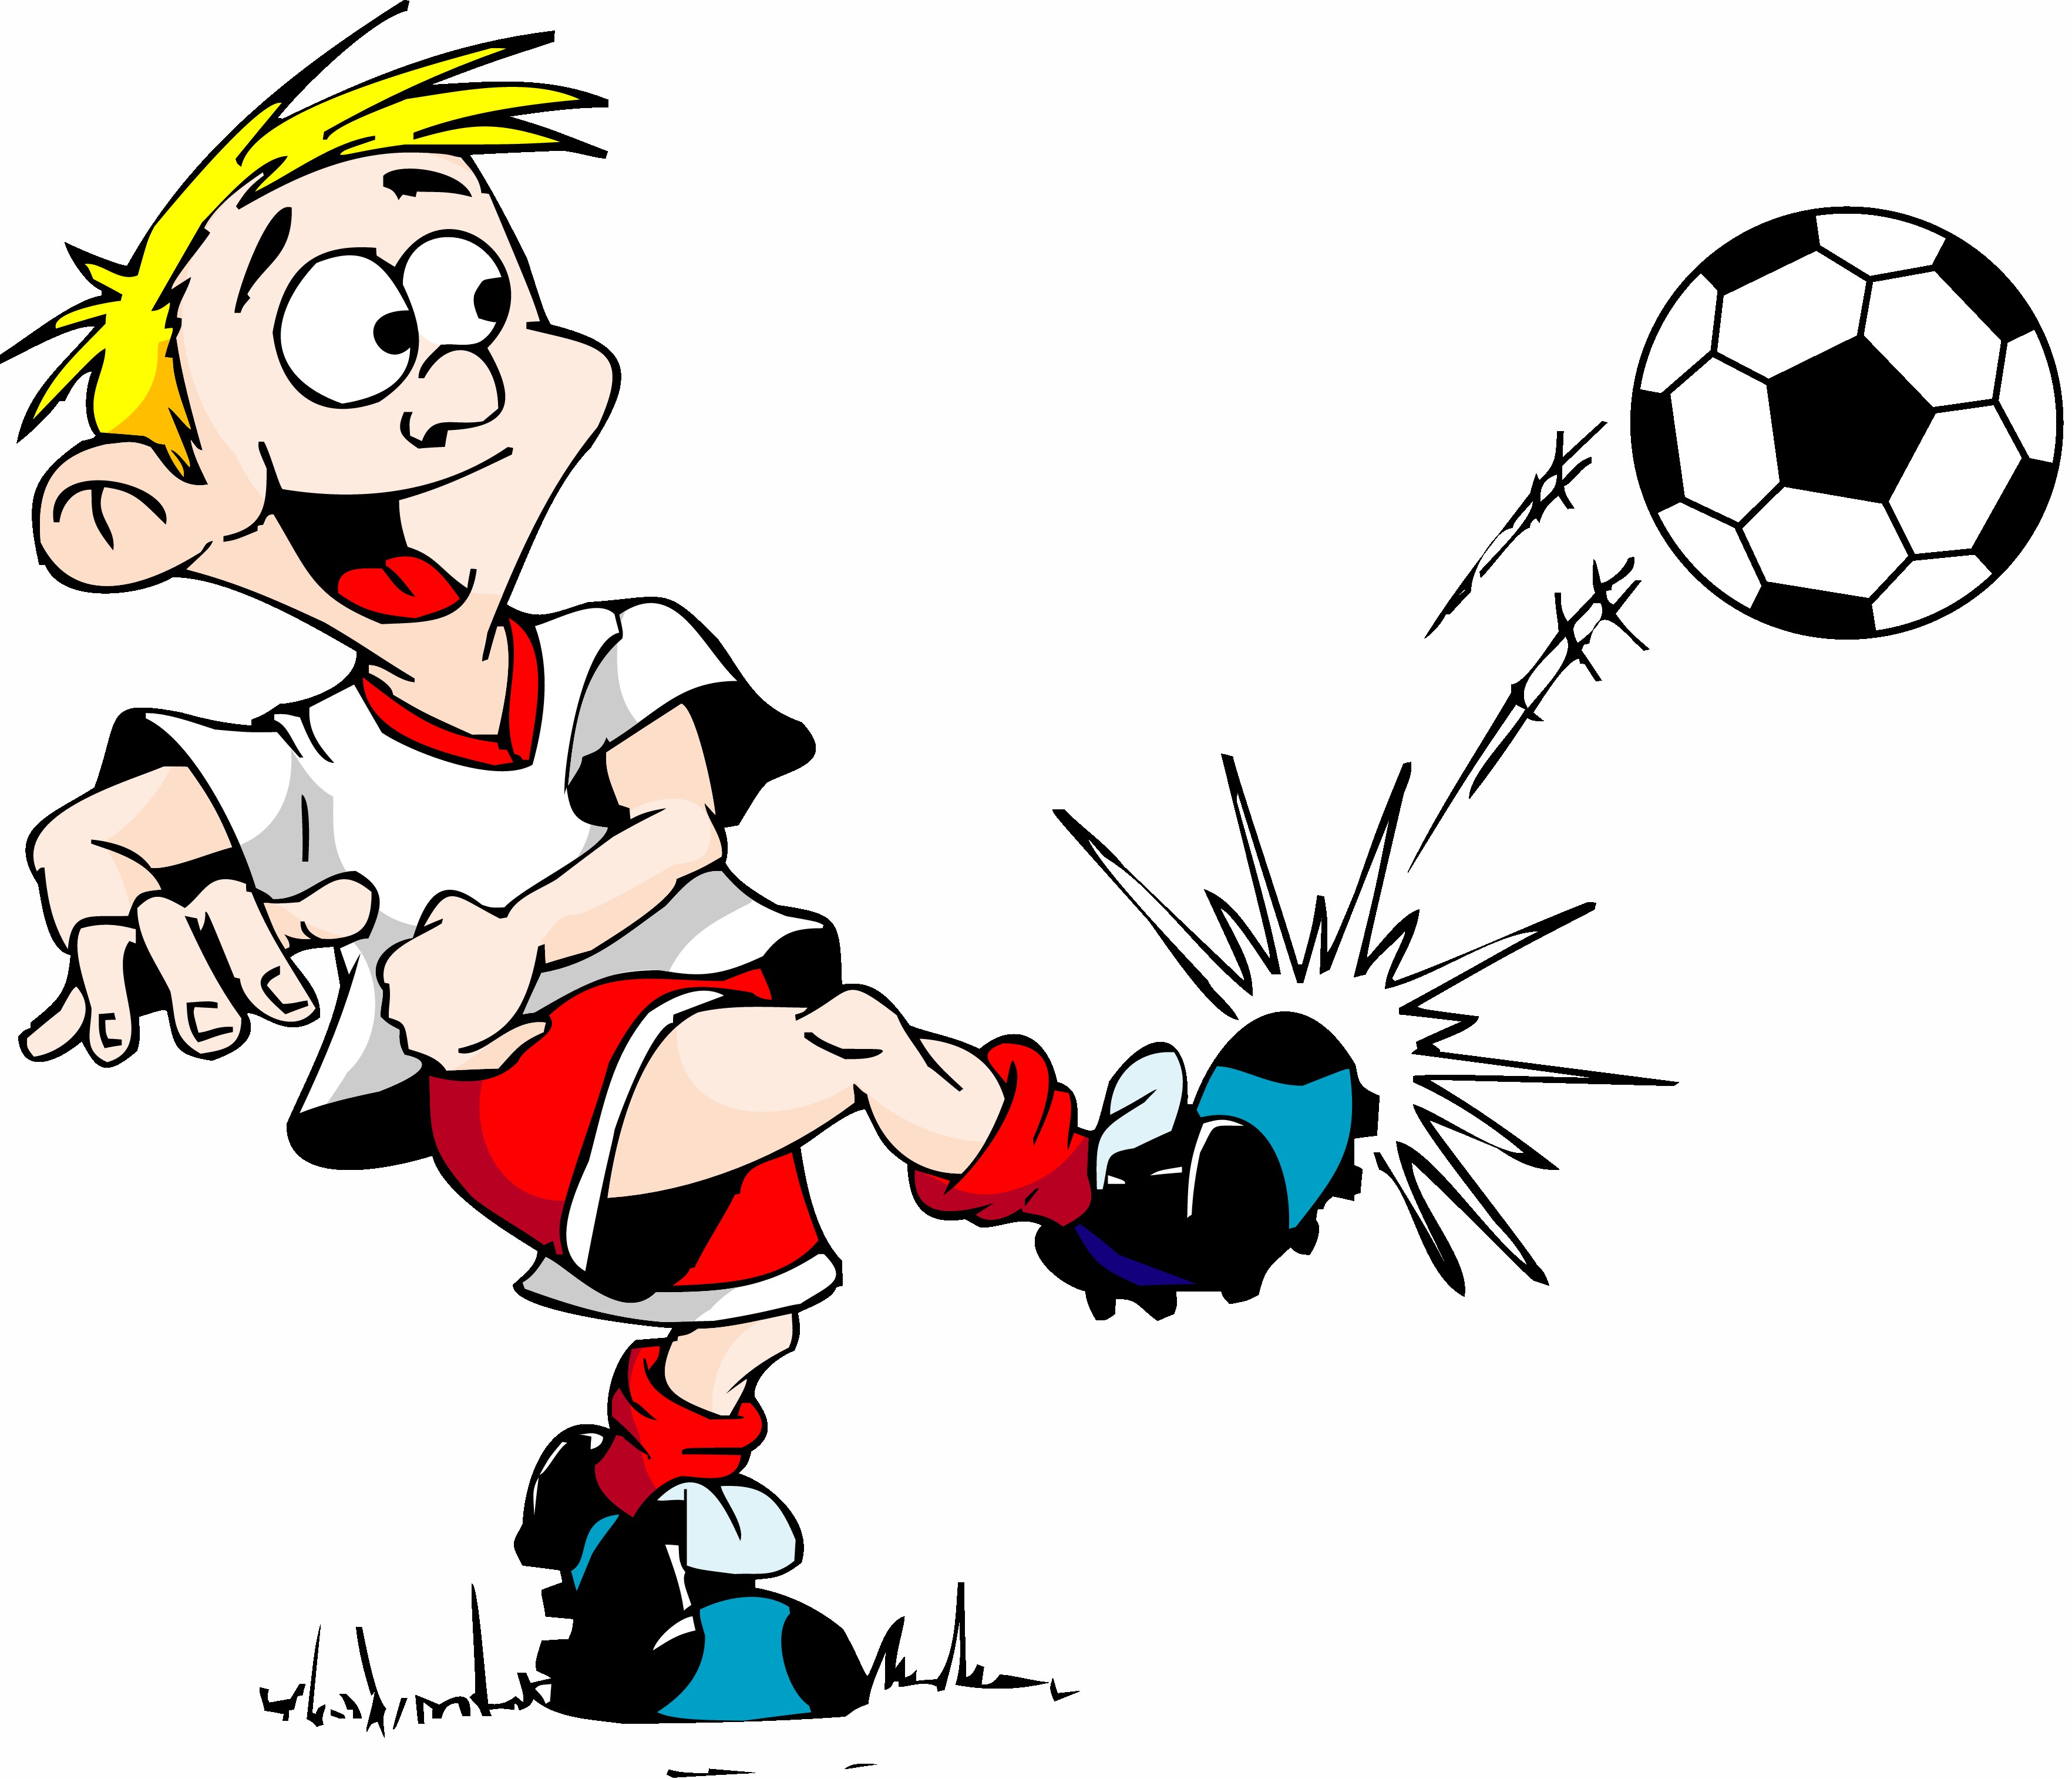 Funny Cartoon Soccer Pictures - ClipArt Best